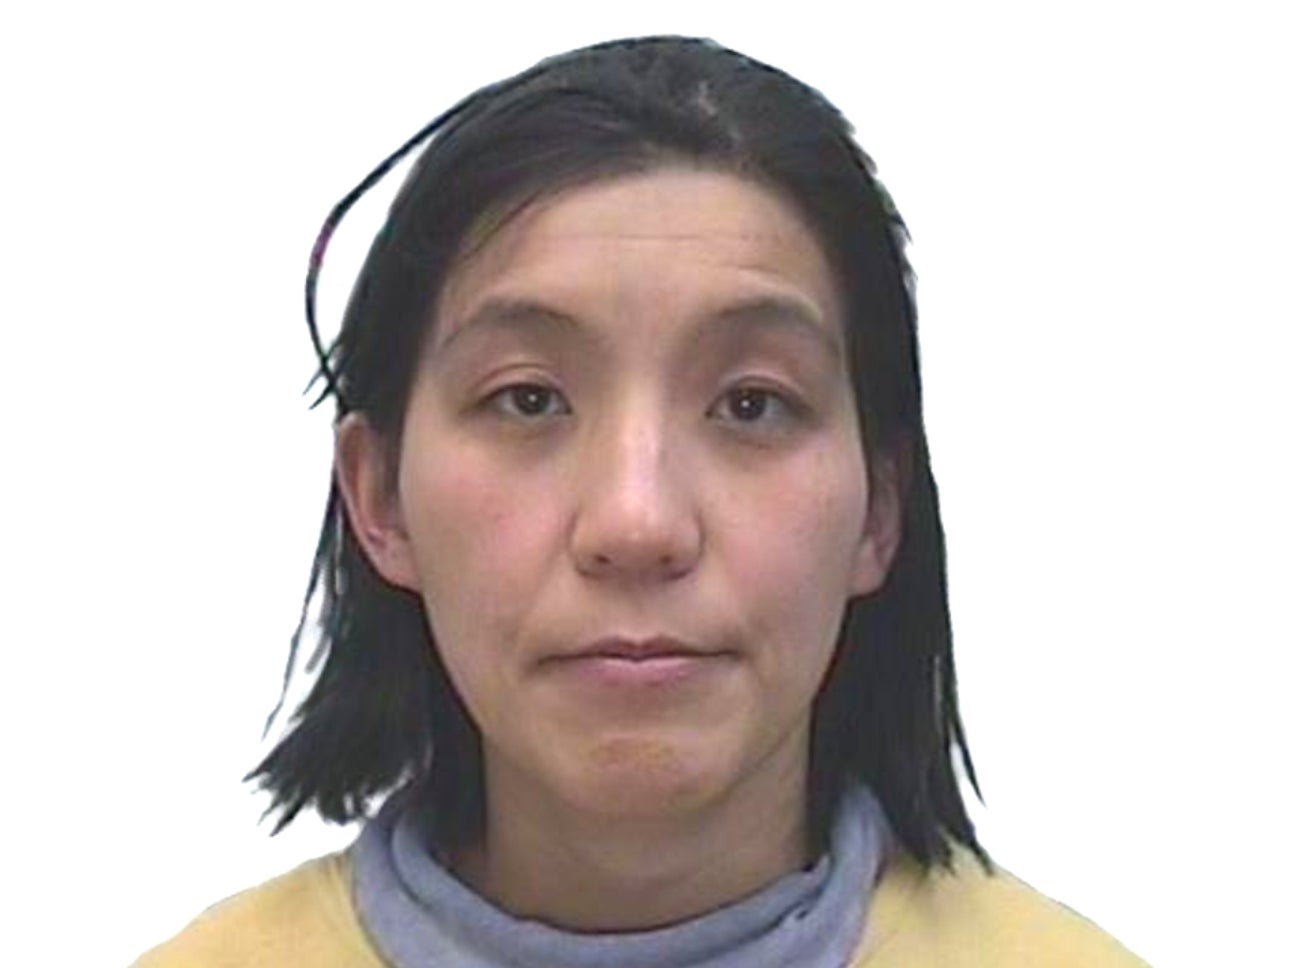 Rina Yasutake was found dead at a property in Yorkshire in a state of decomposition